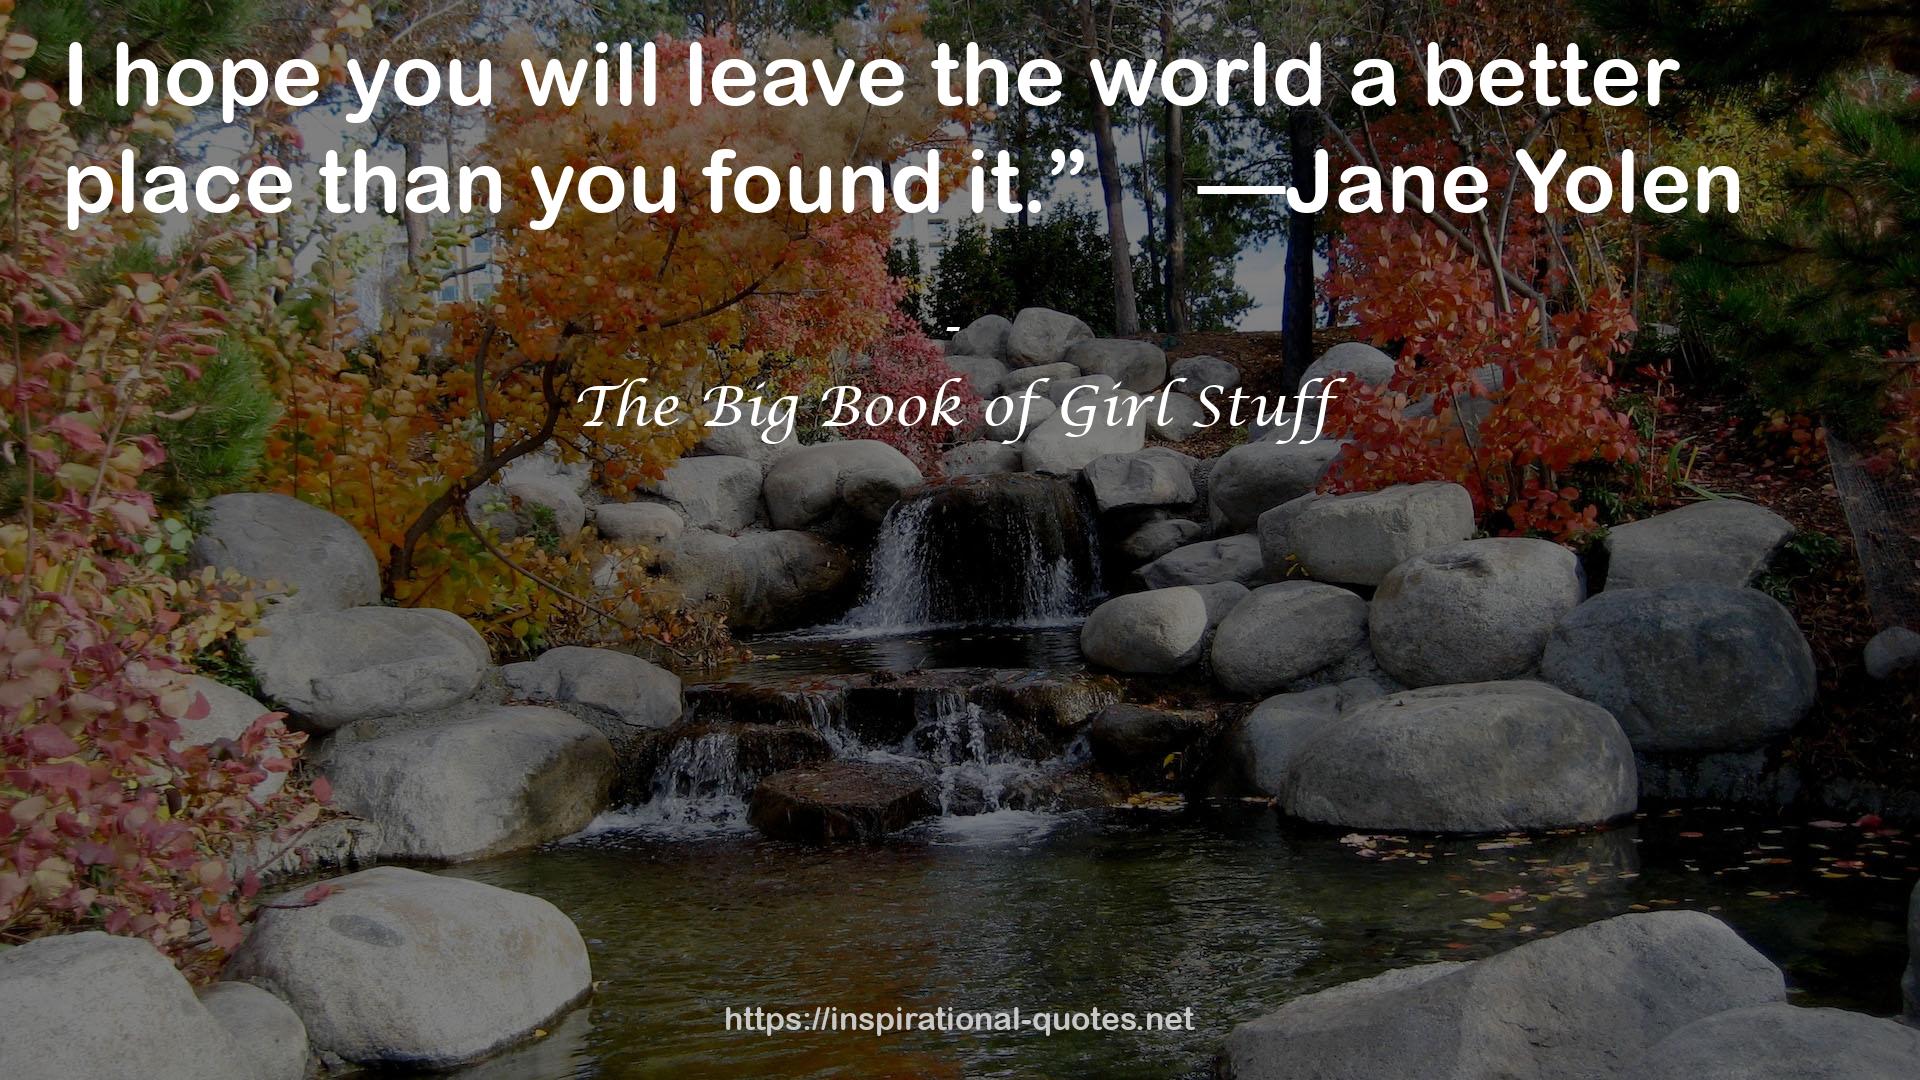 The Big Book of Girl Stuff QUOTES